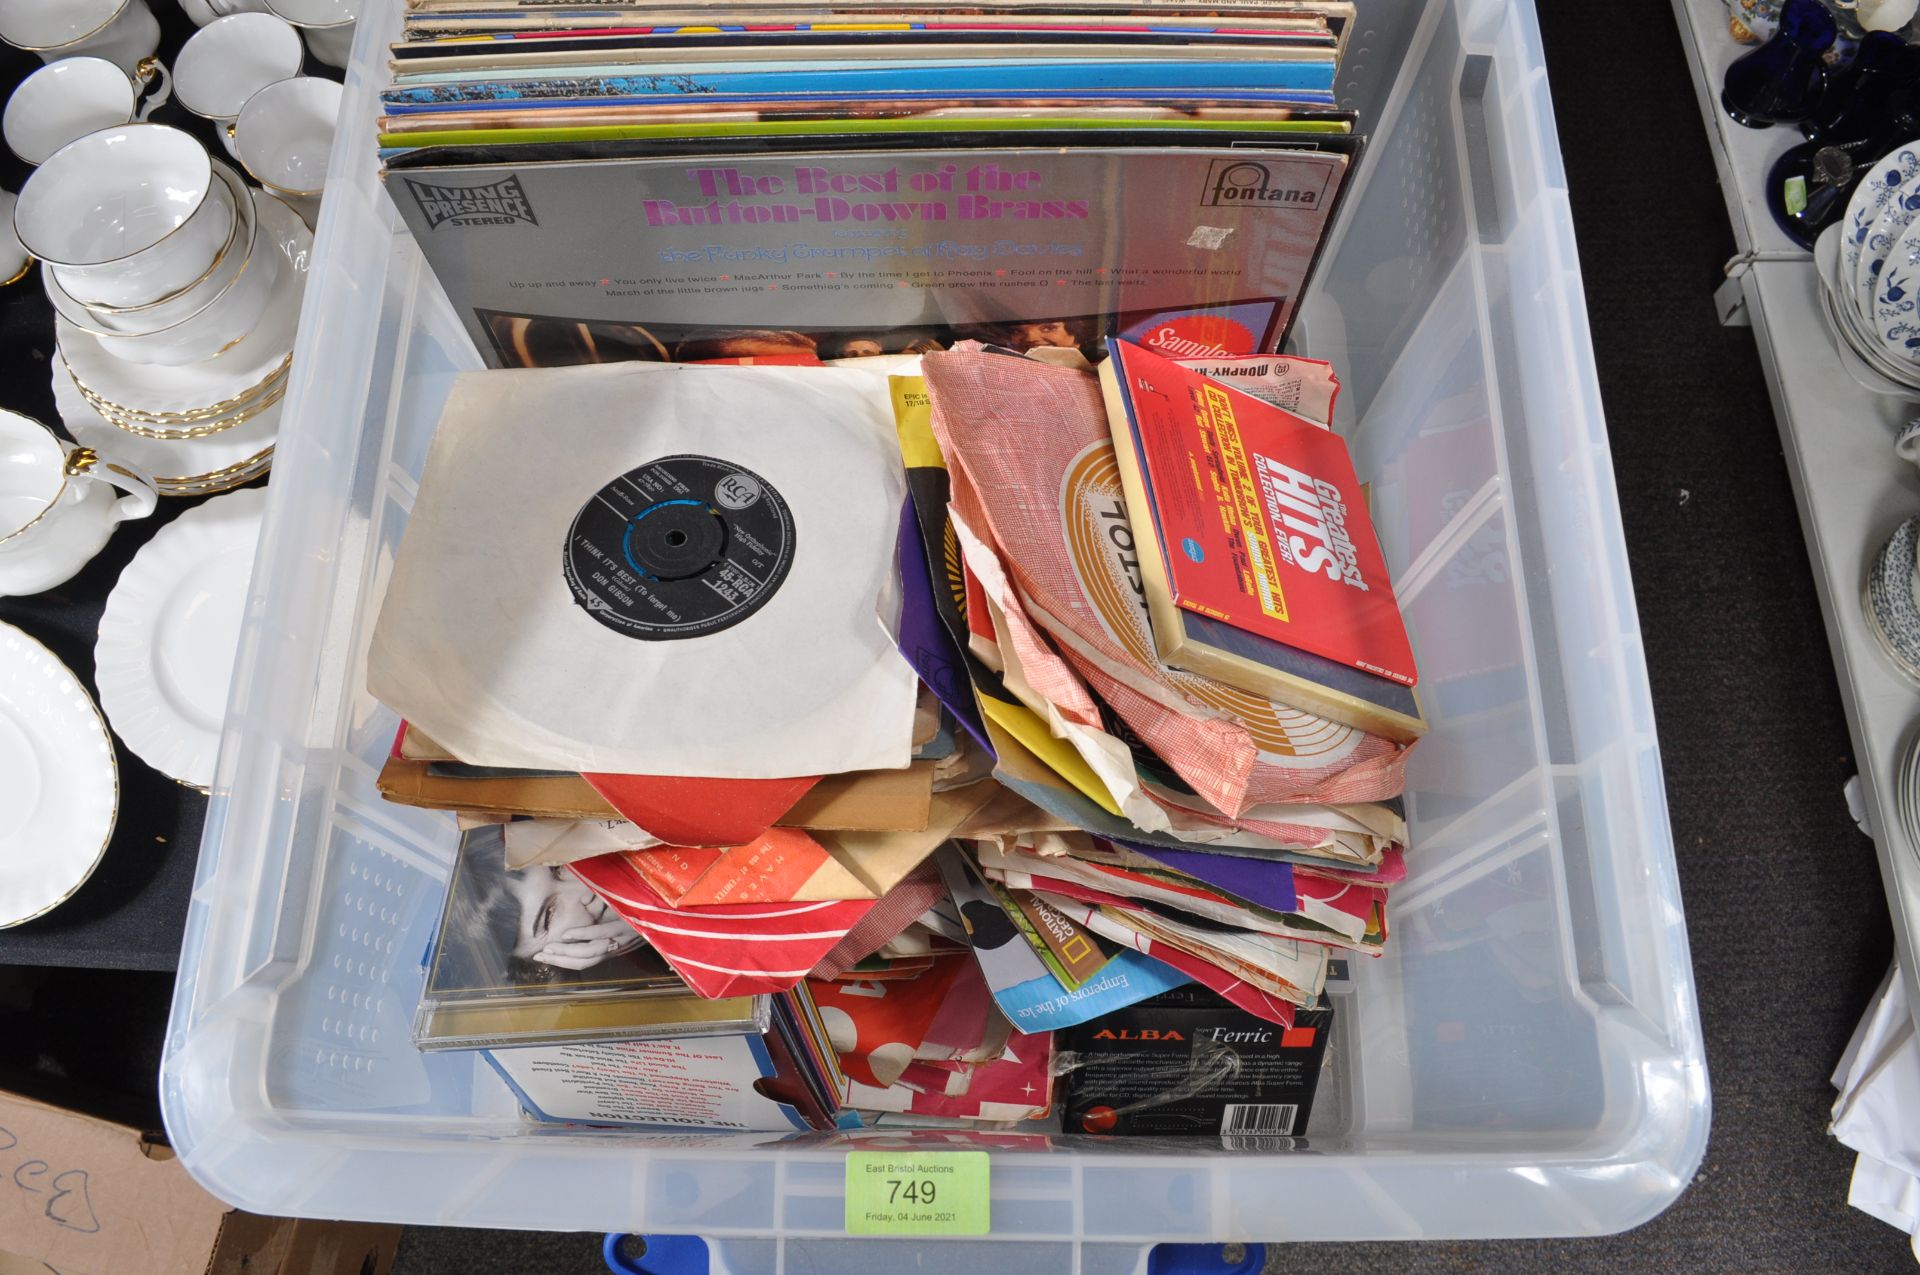 LARGE COLLECTION OF LP’S VINYL 45RPM RECORDS